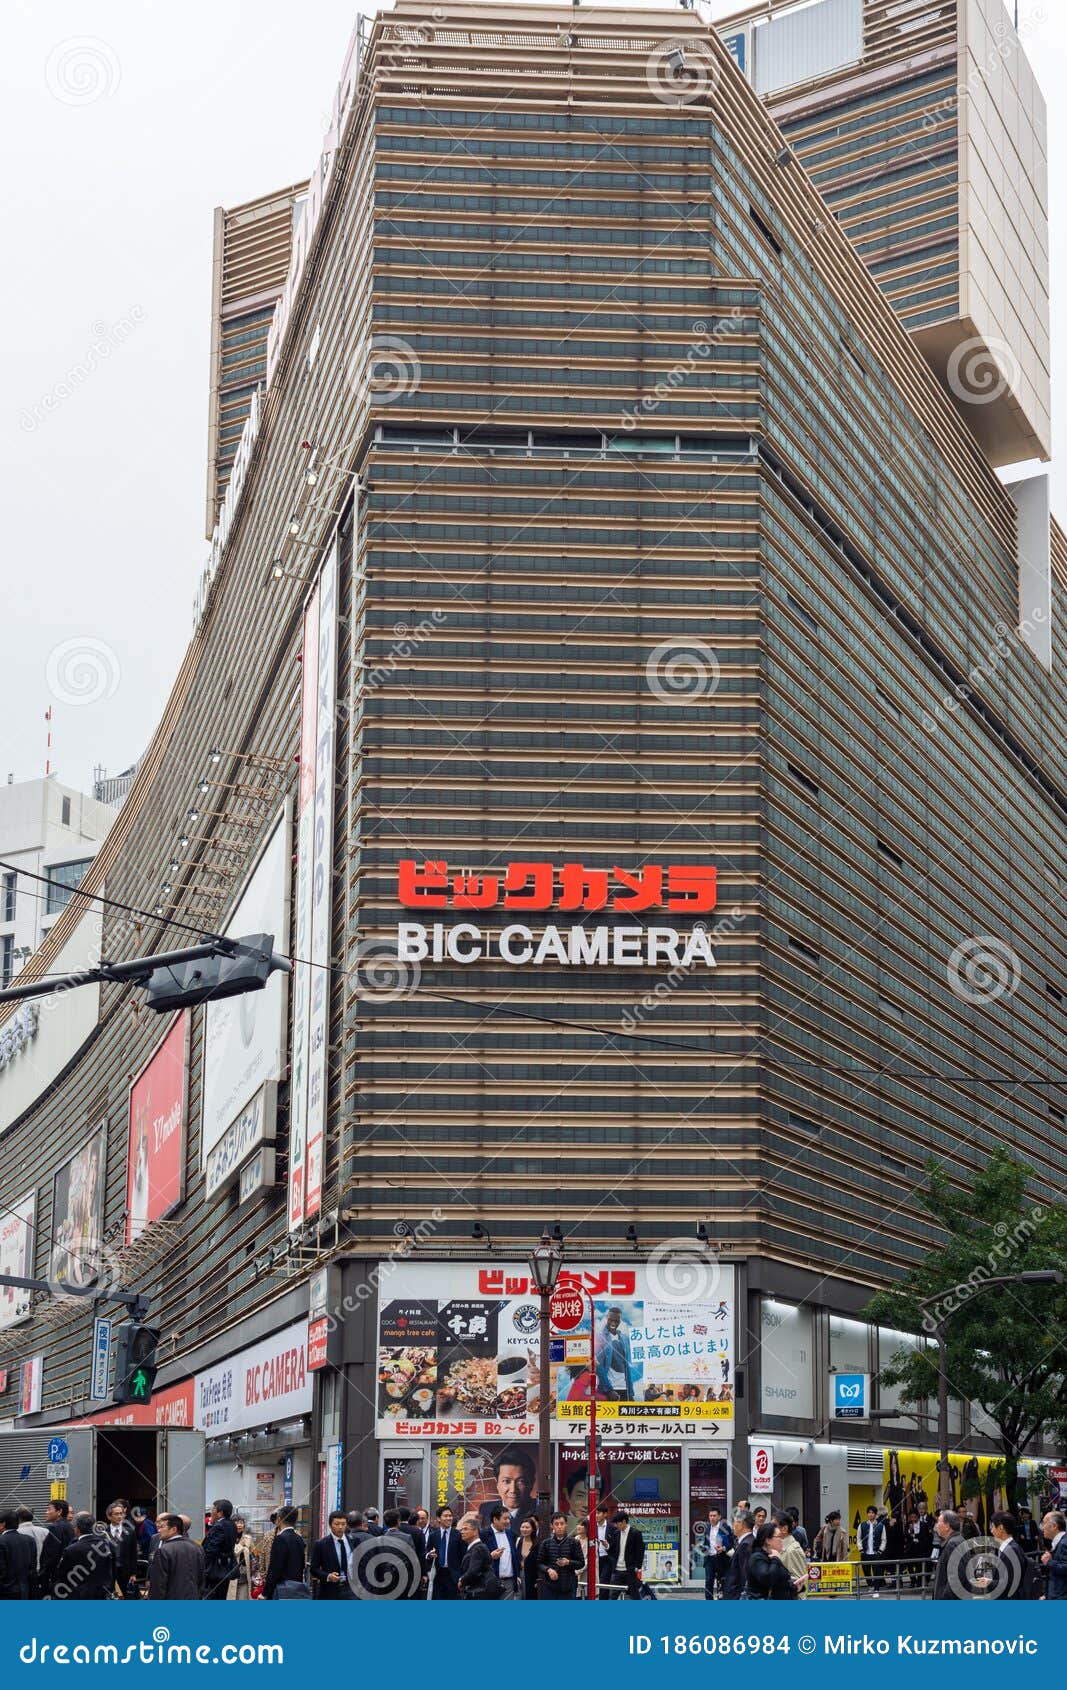 Bic Camera Photos Free Royalty Free Stock Photos From Dreamstime